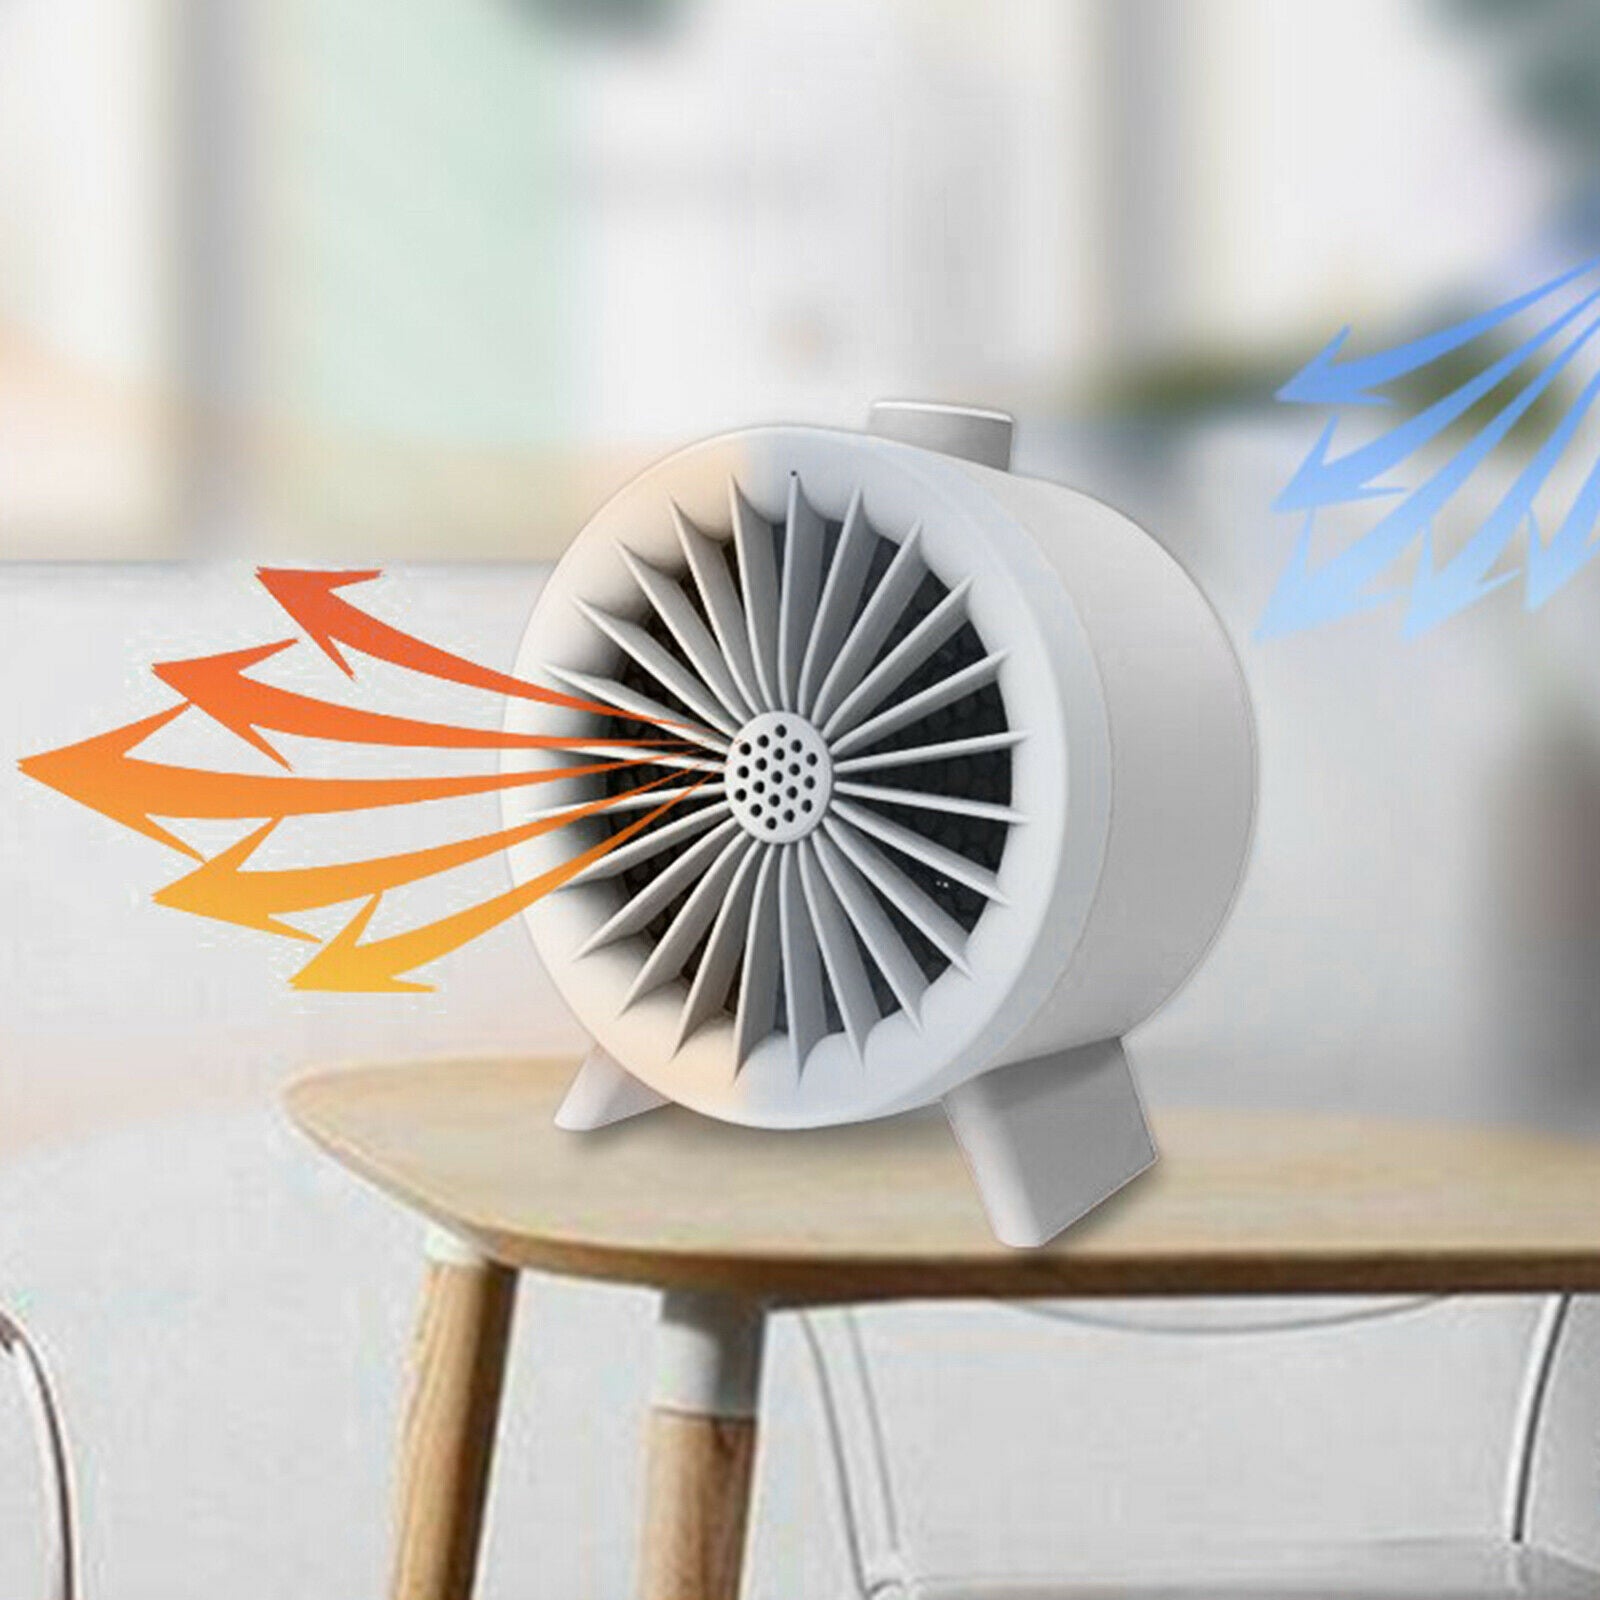 Portable Electric Space Heater Adjustable Personal Fan Thermostat Desk Decor